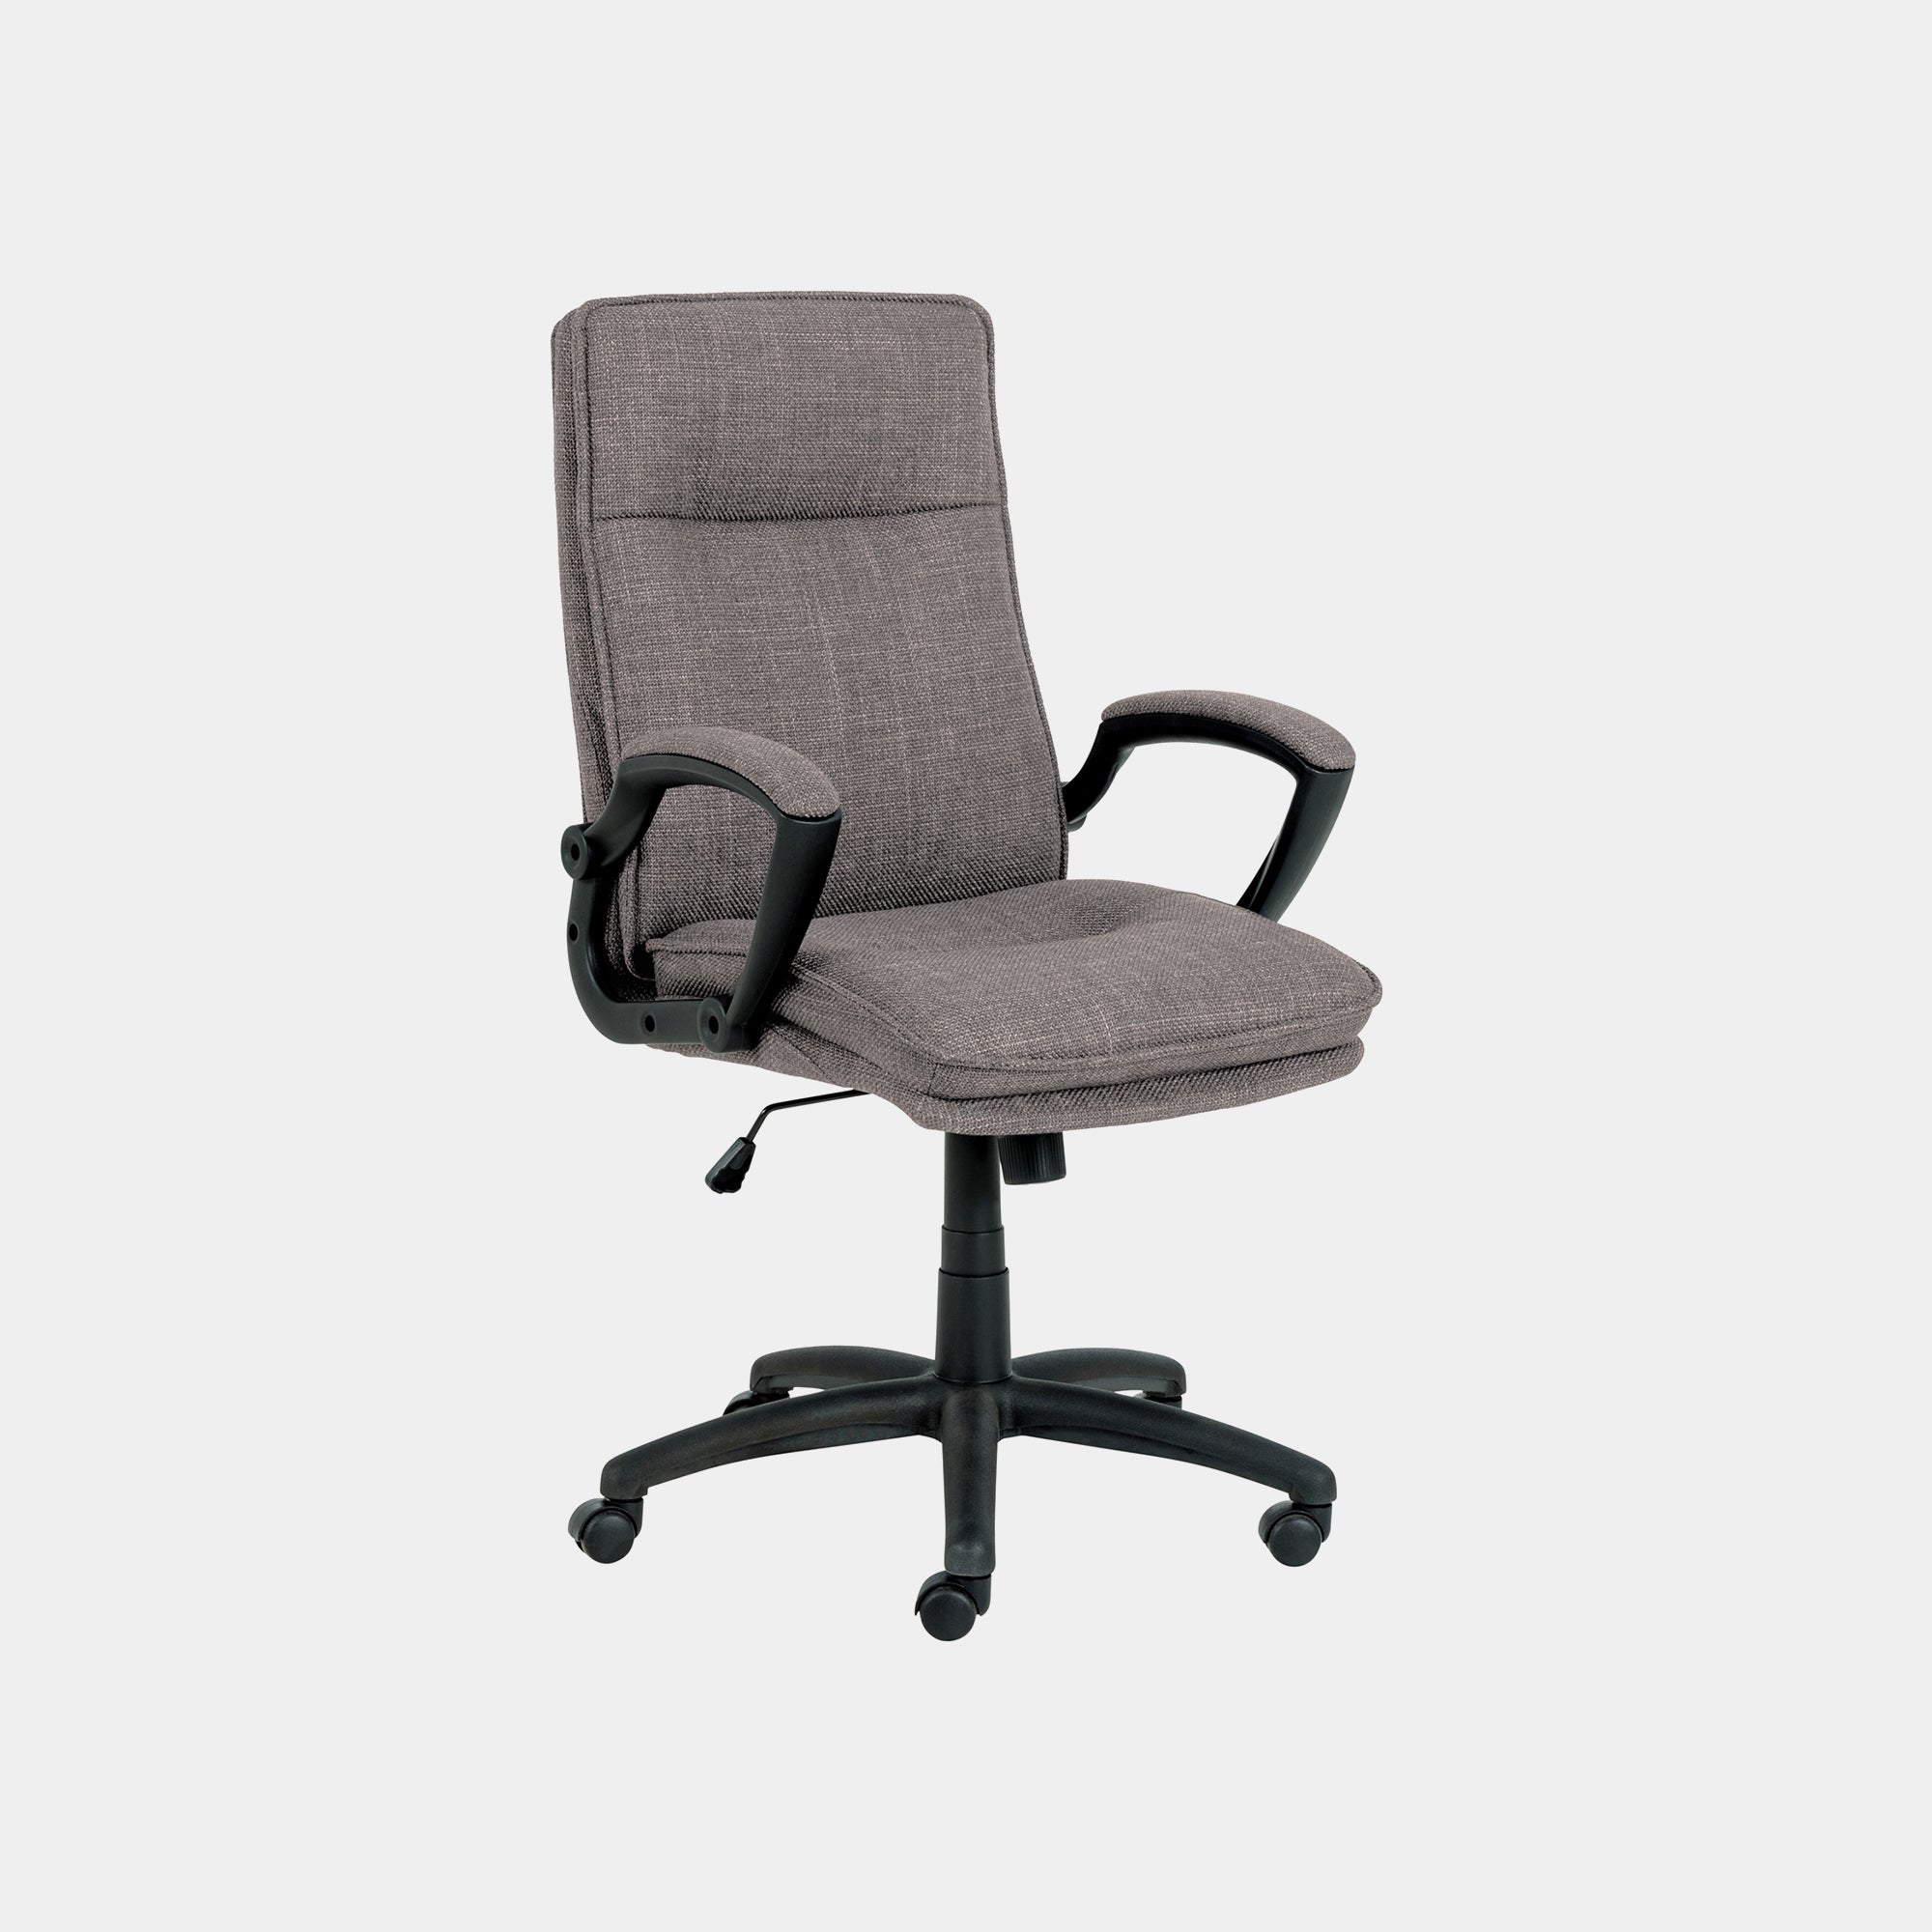 Desk Chair In Basel Light Grey/Brown Fabric (Assembly Required)